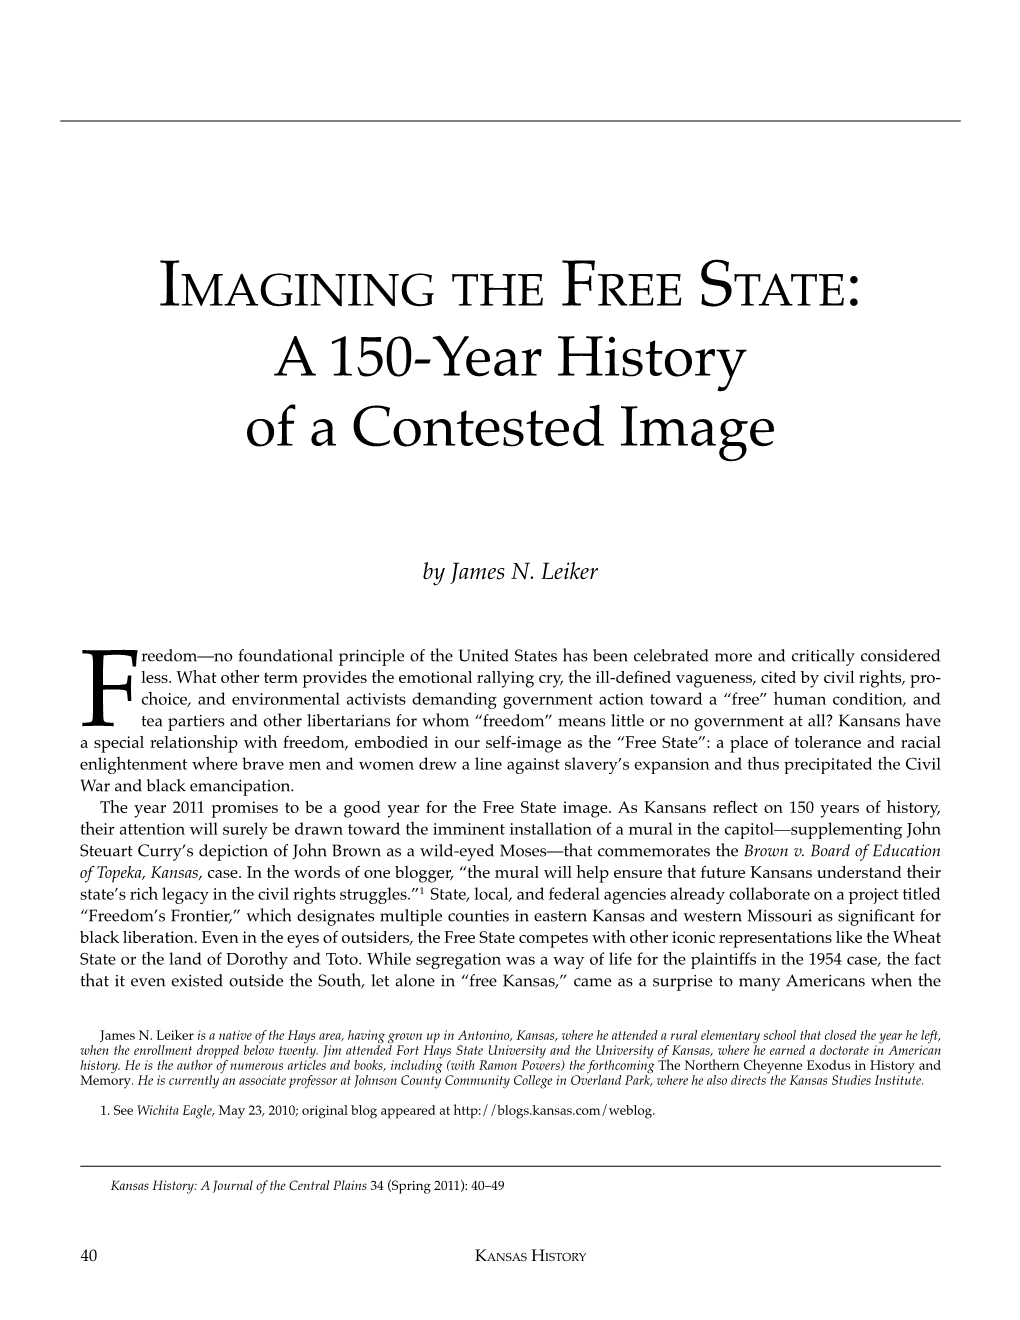 A 150-Year History of a Contested Image